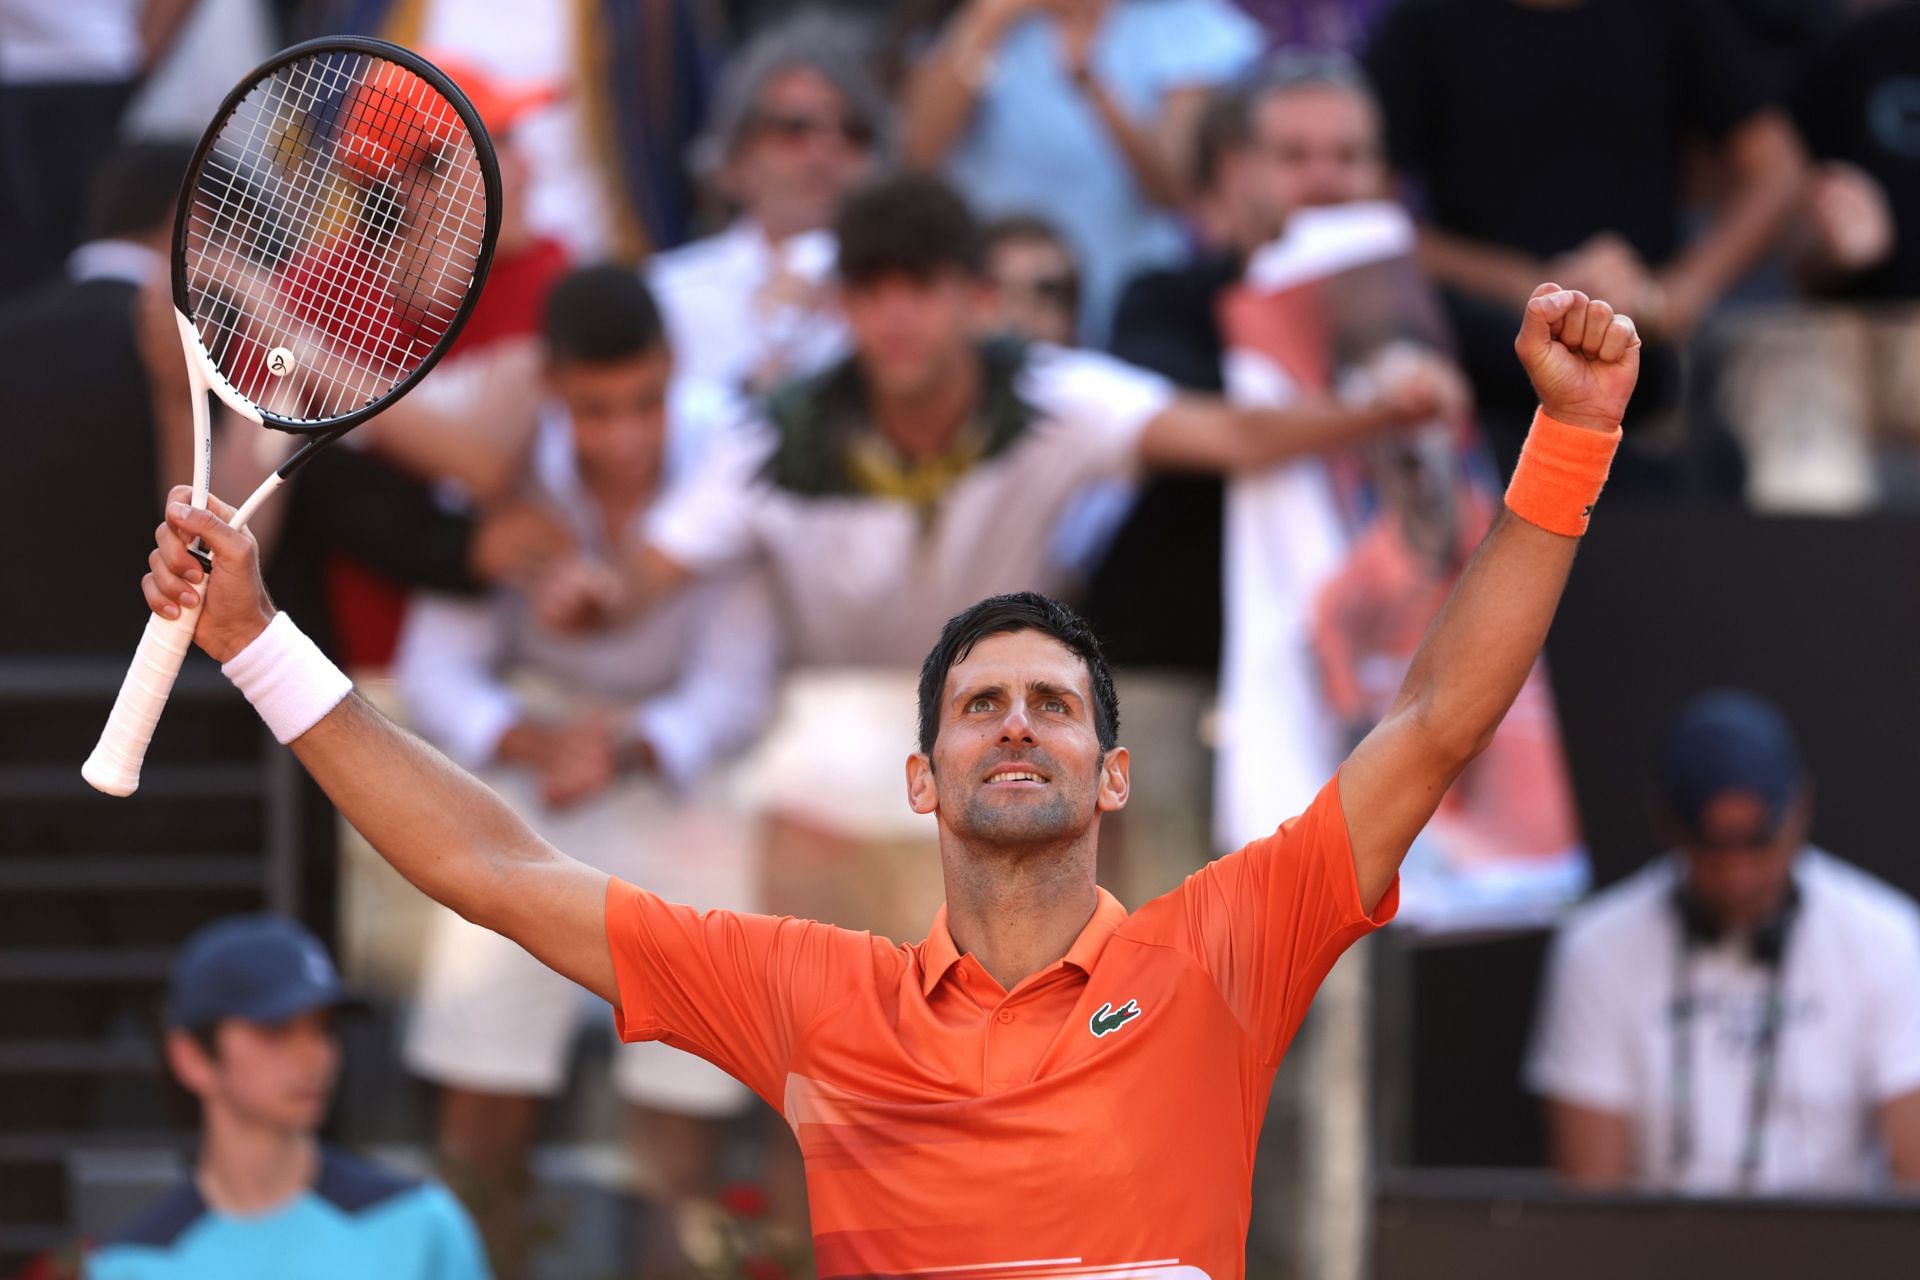 Novak Djokovics next match Opponent, venue, live streaming, TV channel and schedule French Open 2022